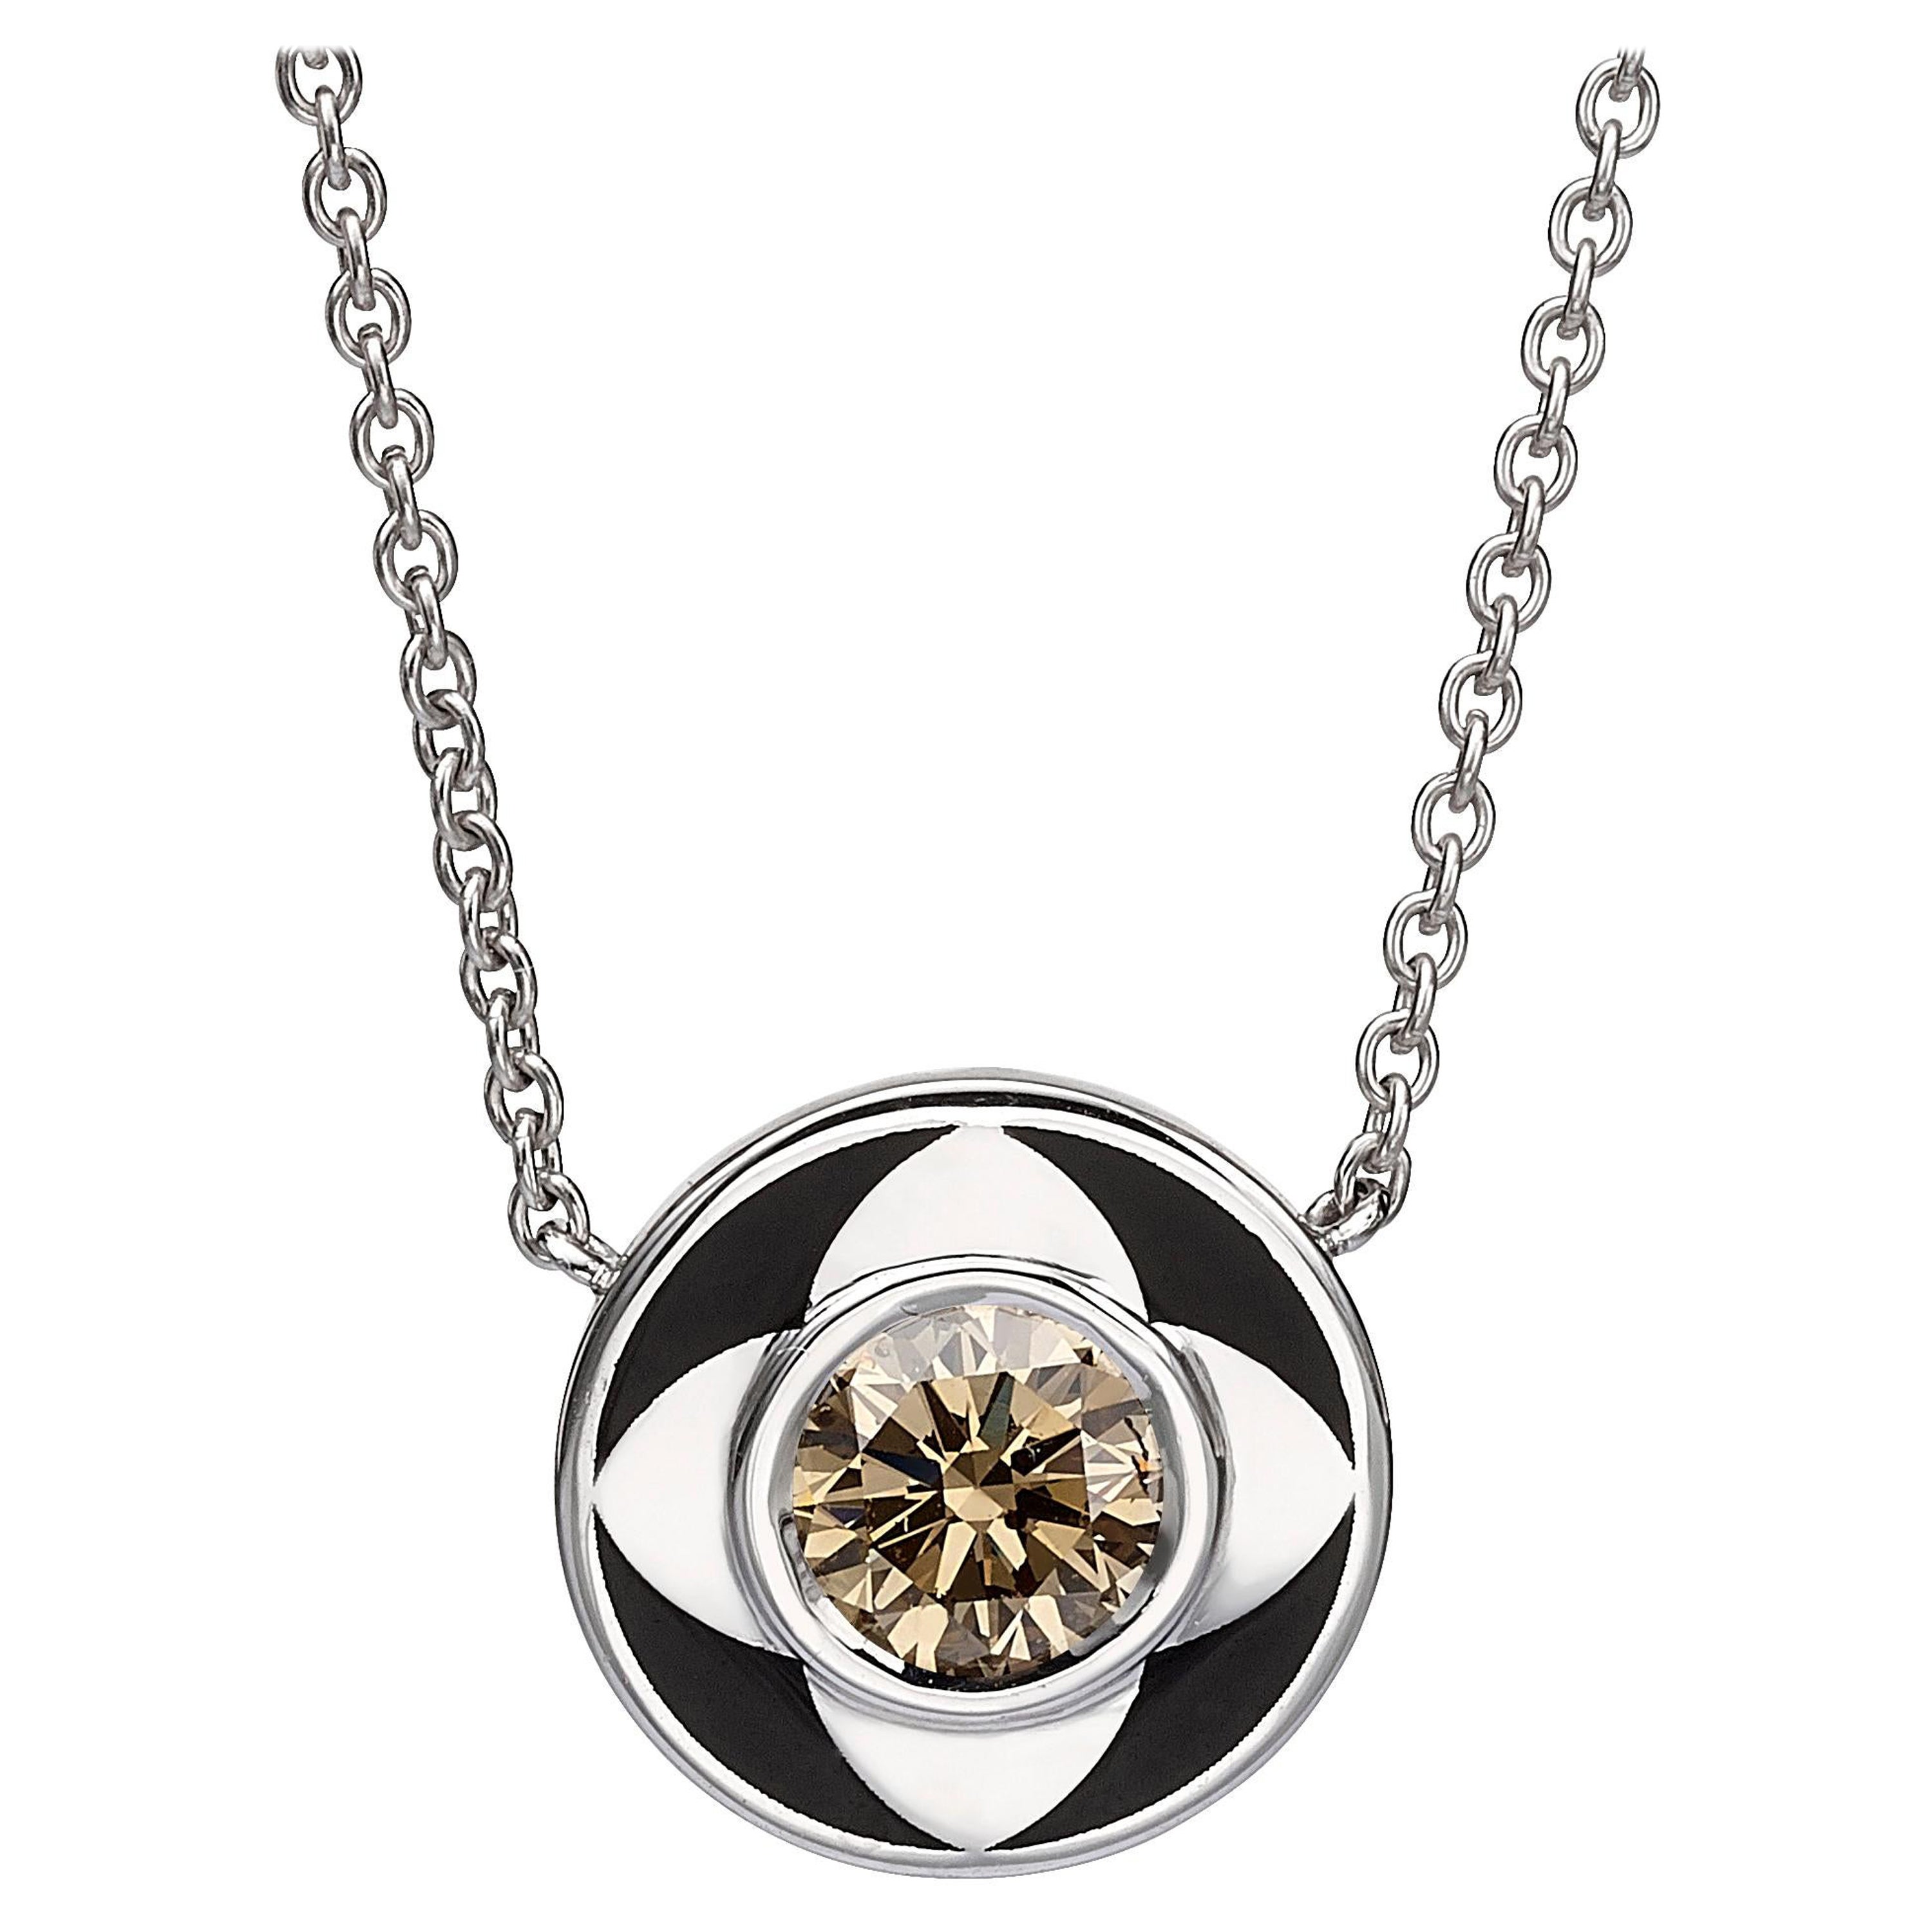 Venice Collection: Round Shaped Black Enamel Diamond Pendant in 18k White Gold For Sale